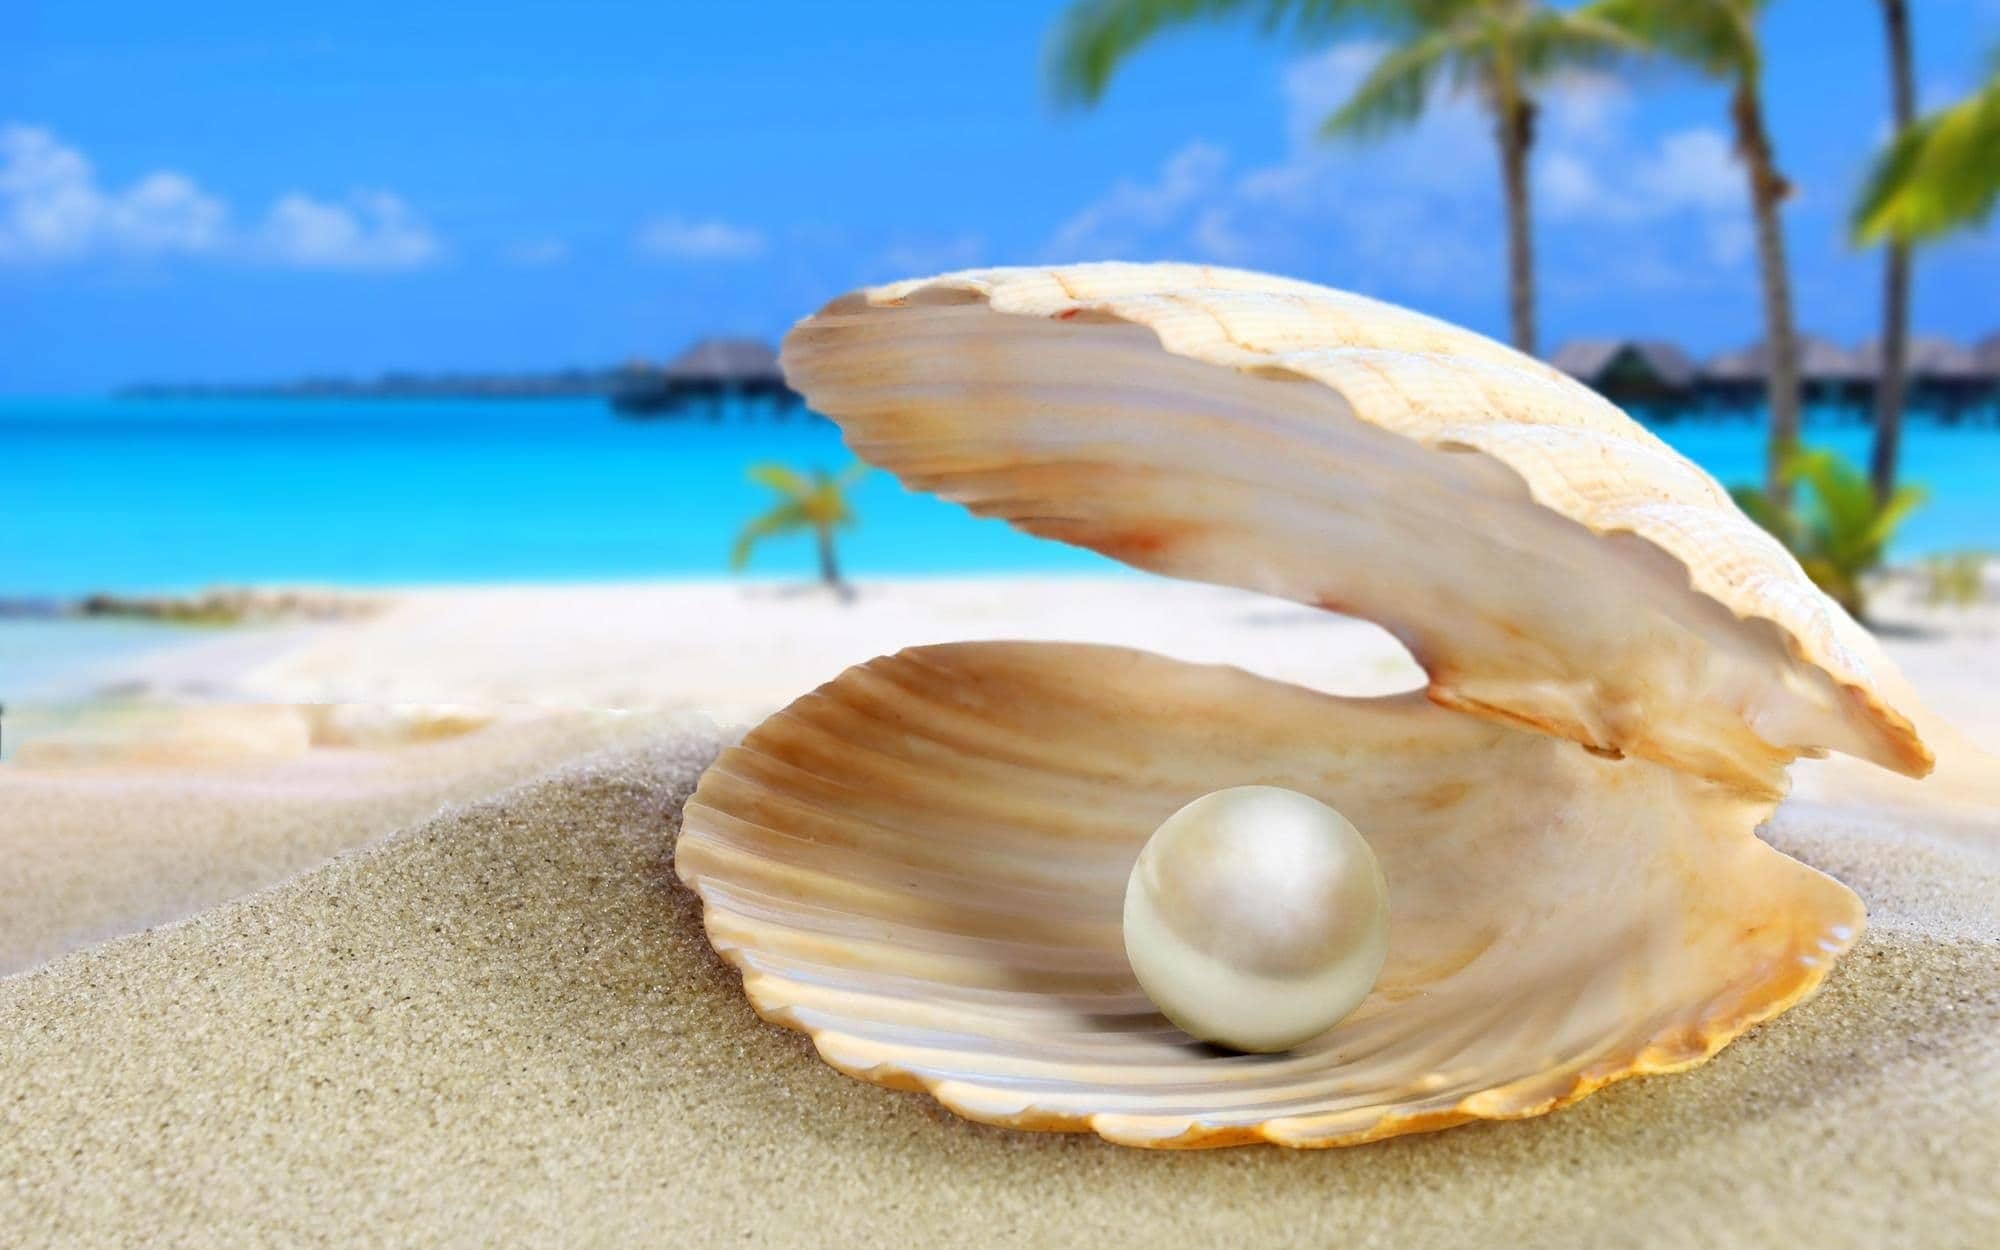 pearl dream meaning, dream about pearl, pearl dream interpretation, seeing in a dream pearl